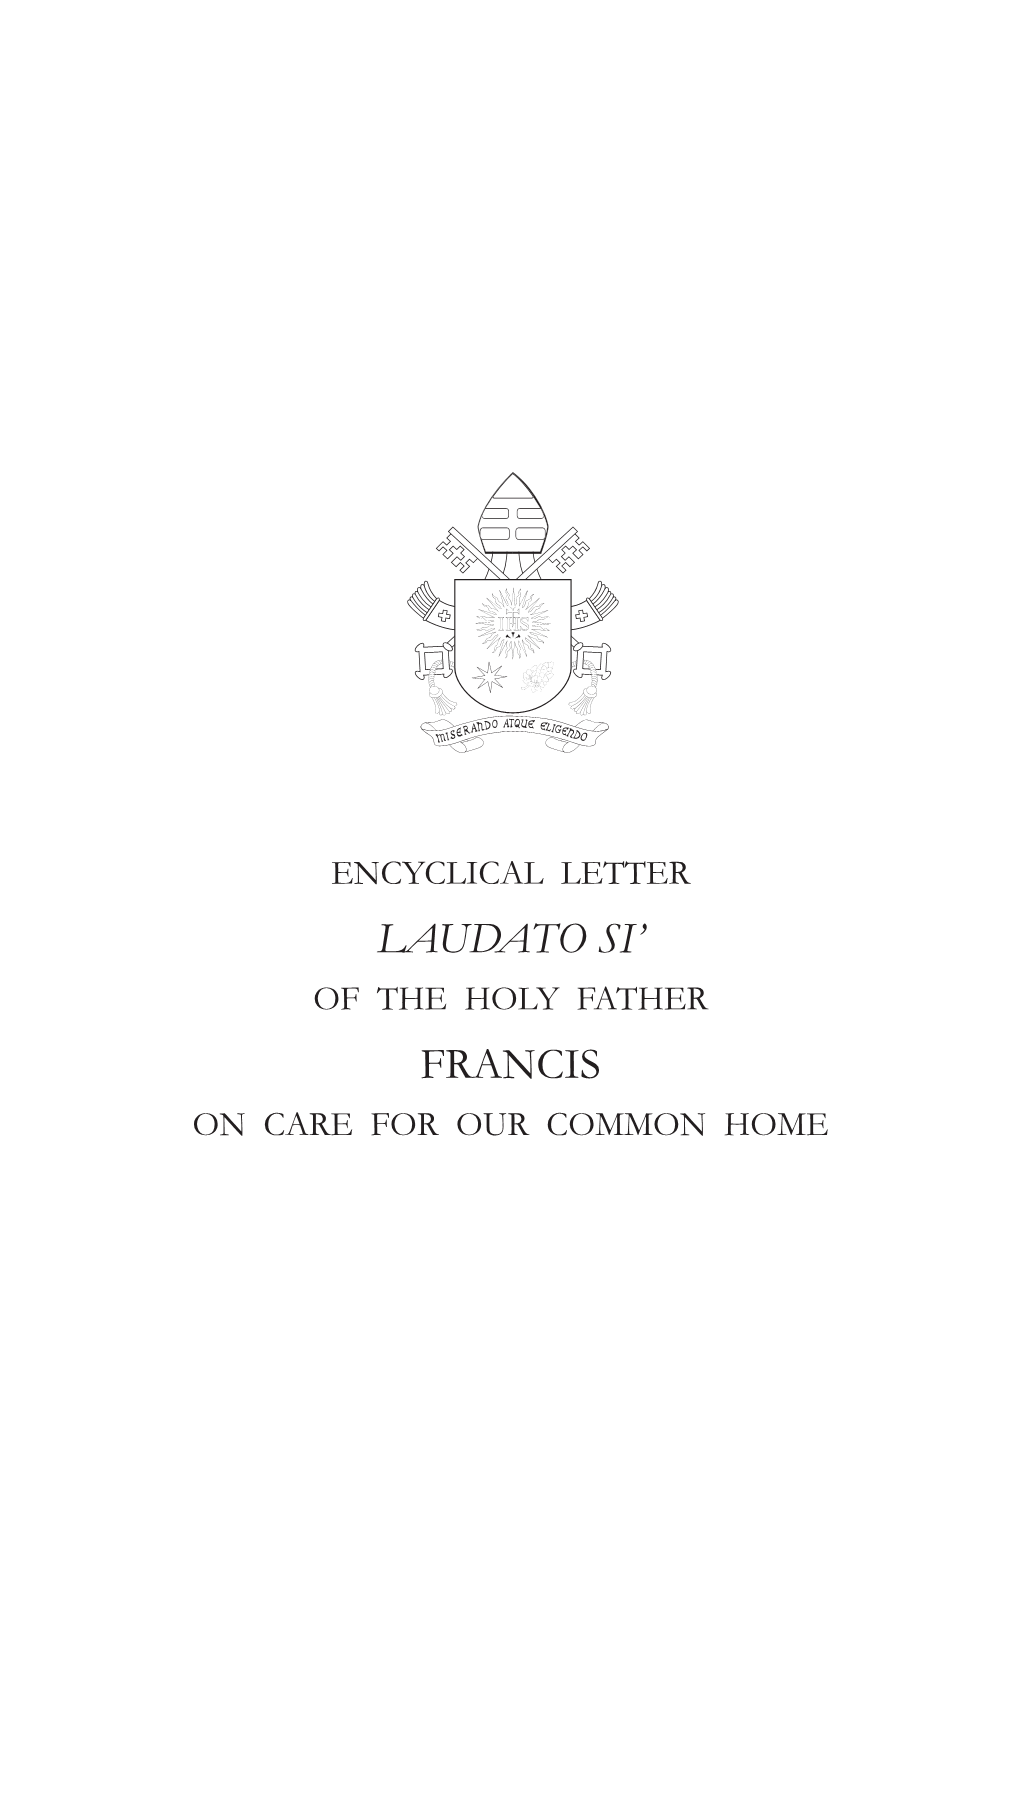 Laudato Si’ of the Holy Father Francis on Care for Our Common Home